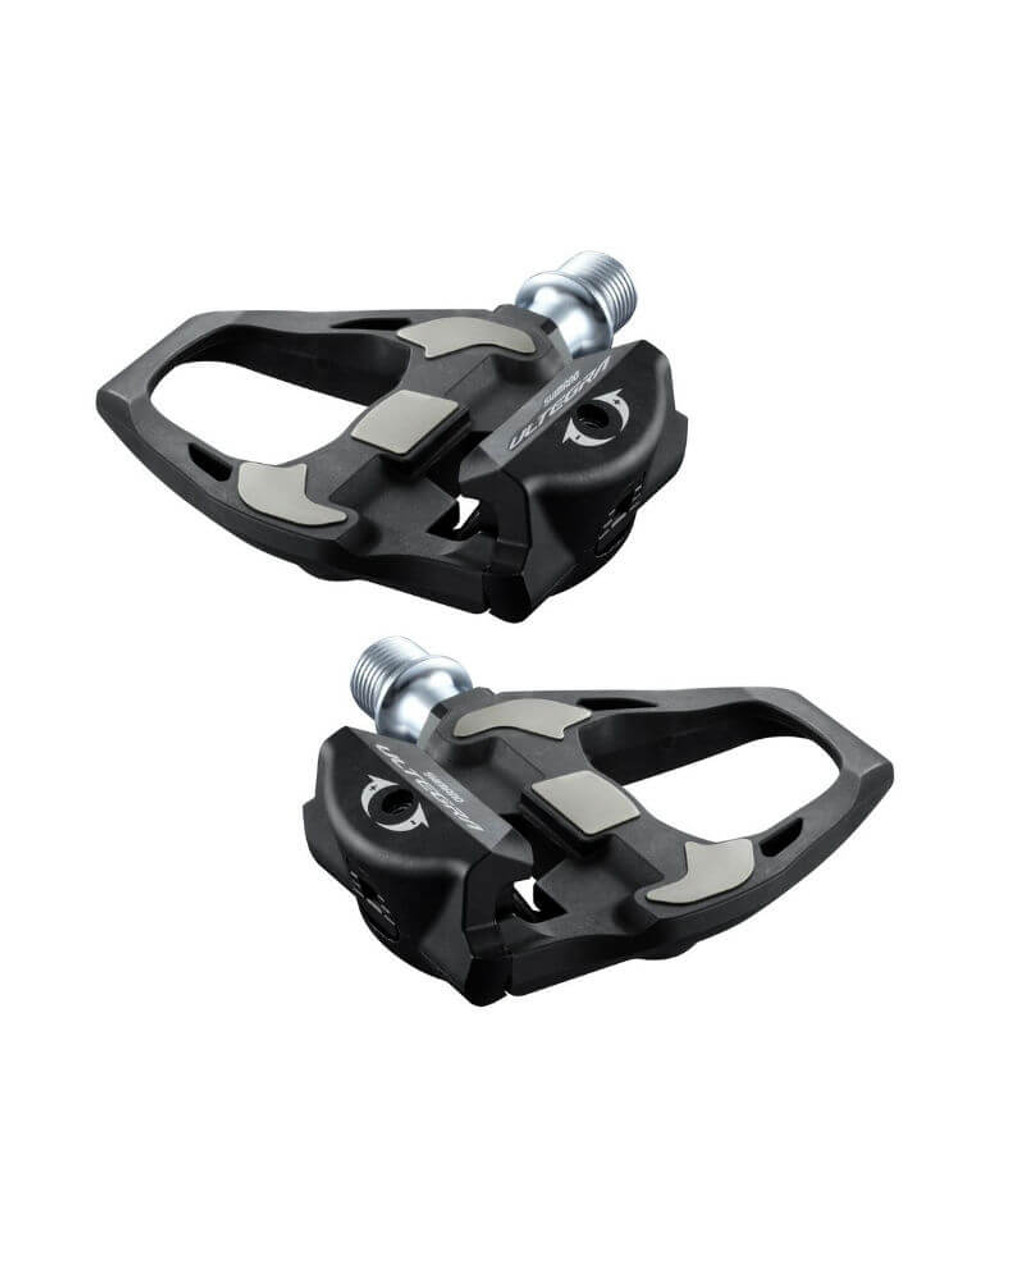 r8000 pedals